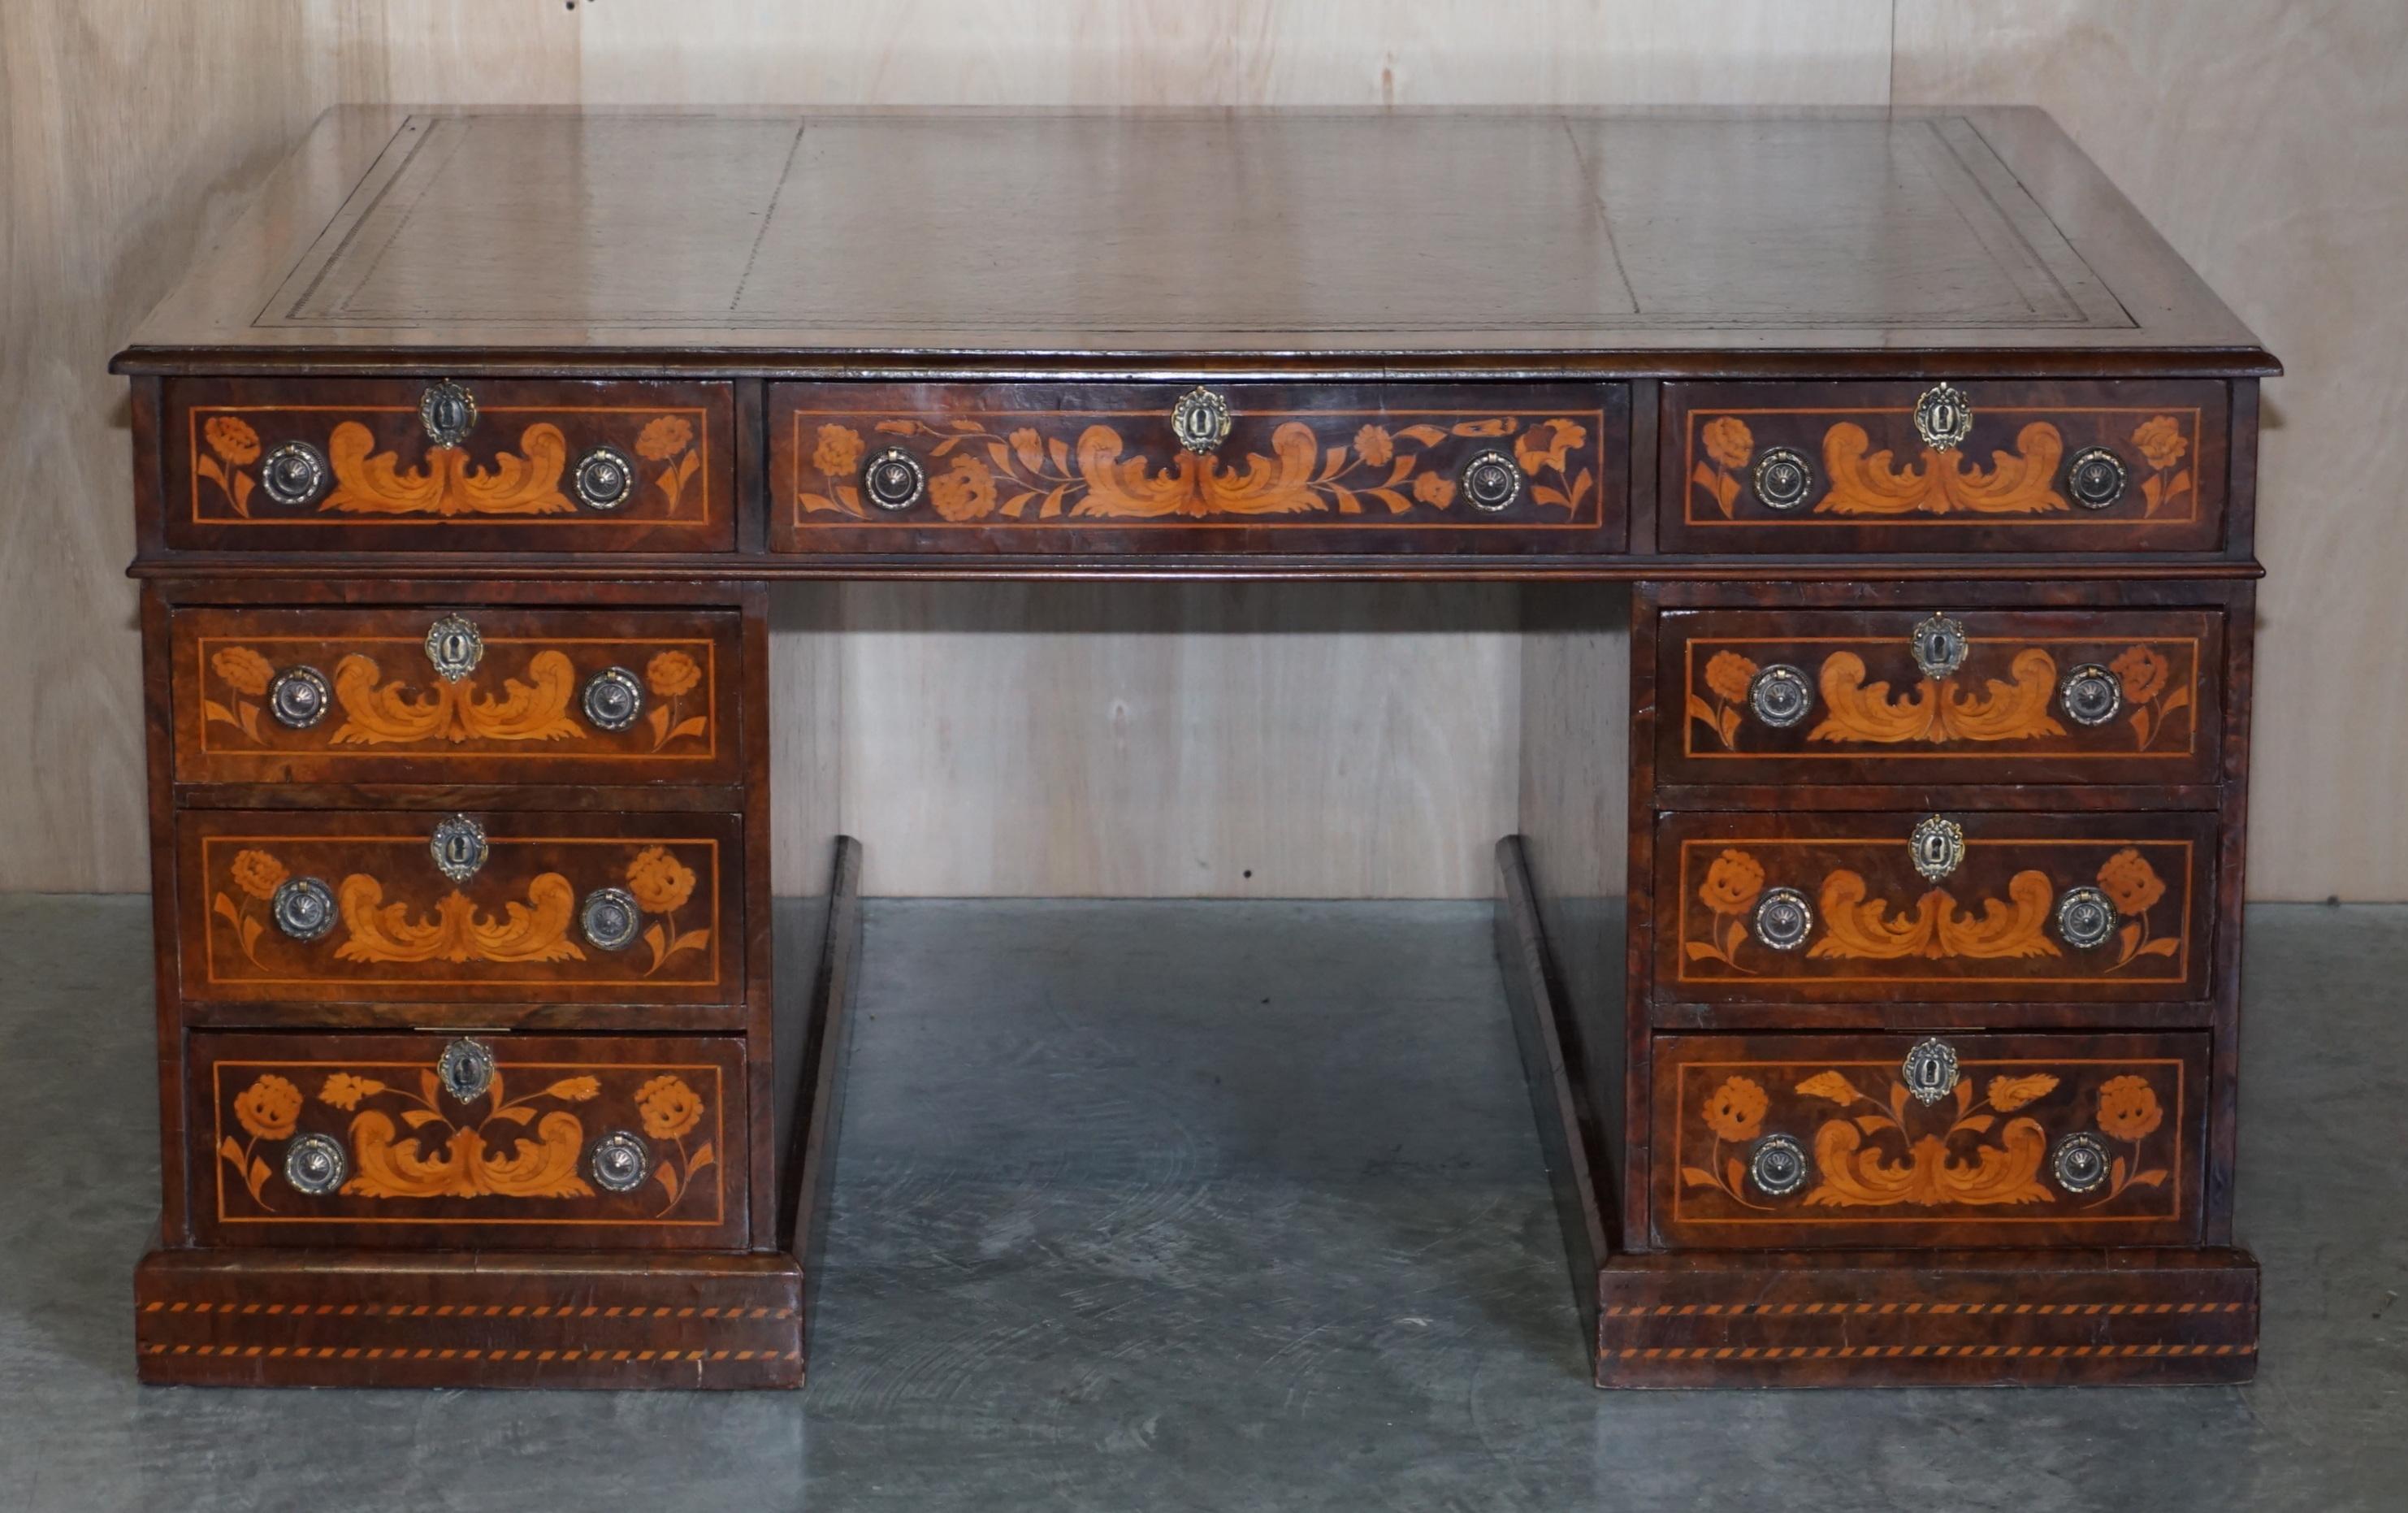 We are delighted to offer for sale this Museum quality, circa 1880 Dutch inlaid extra large twin pedestal, double sided partners desk which has been fully restored

A truly stunning and exquisitely made piece, this is pure art furniture from every